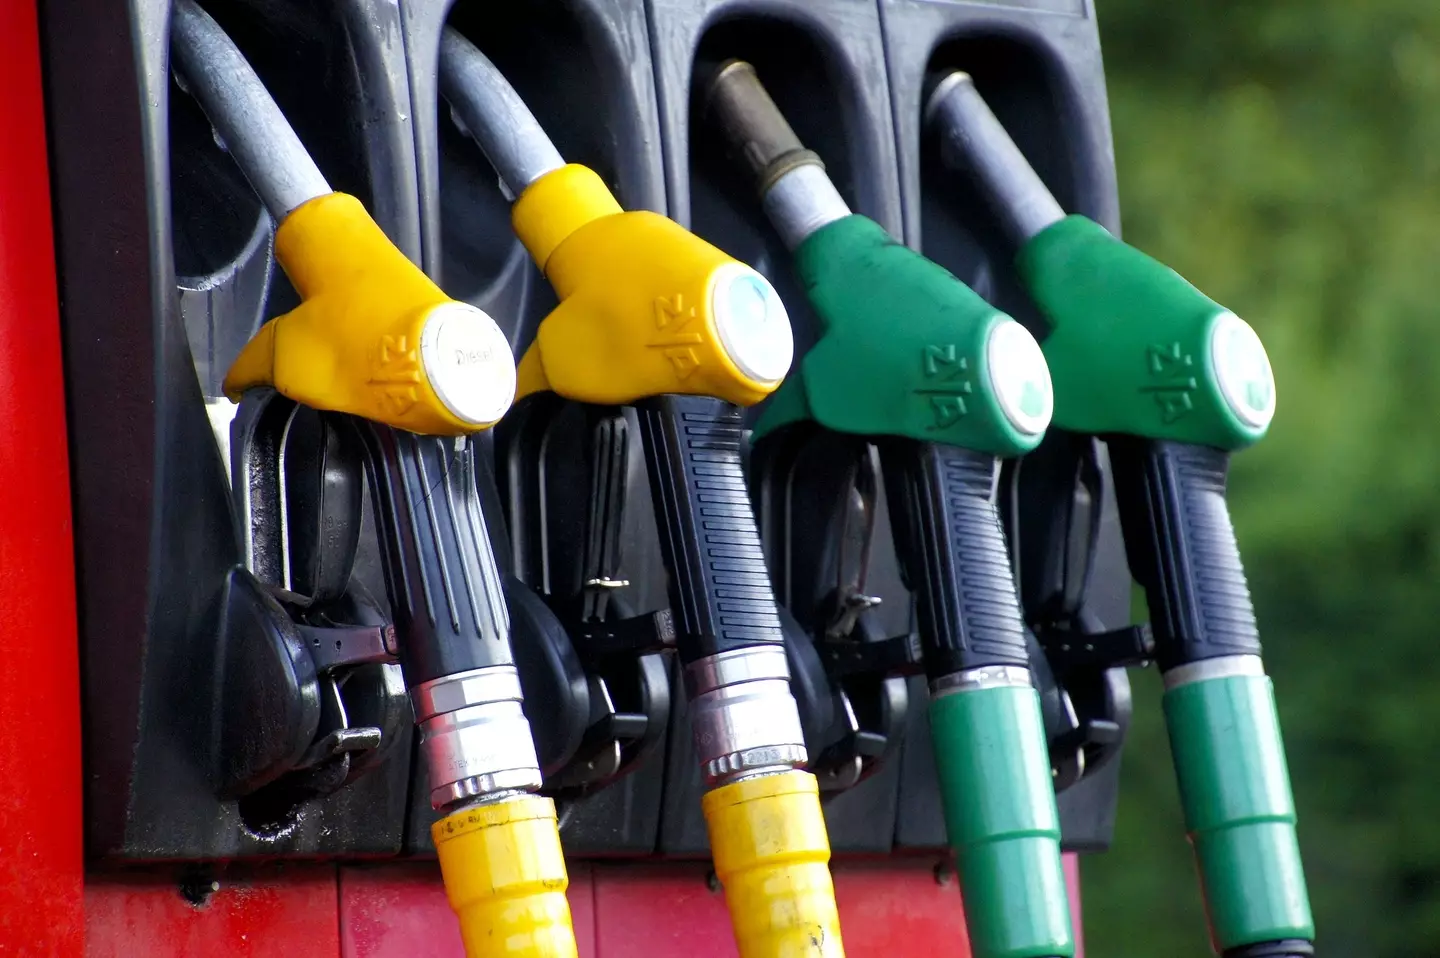 Fuel prices have hit record highs.